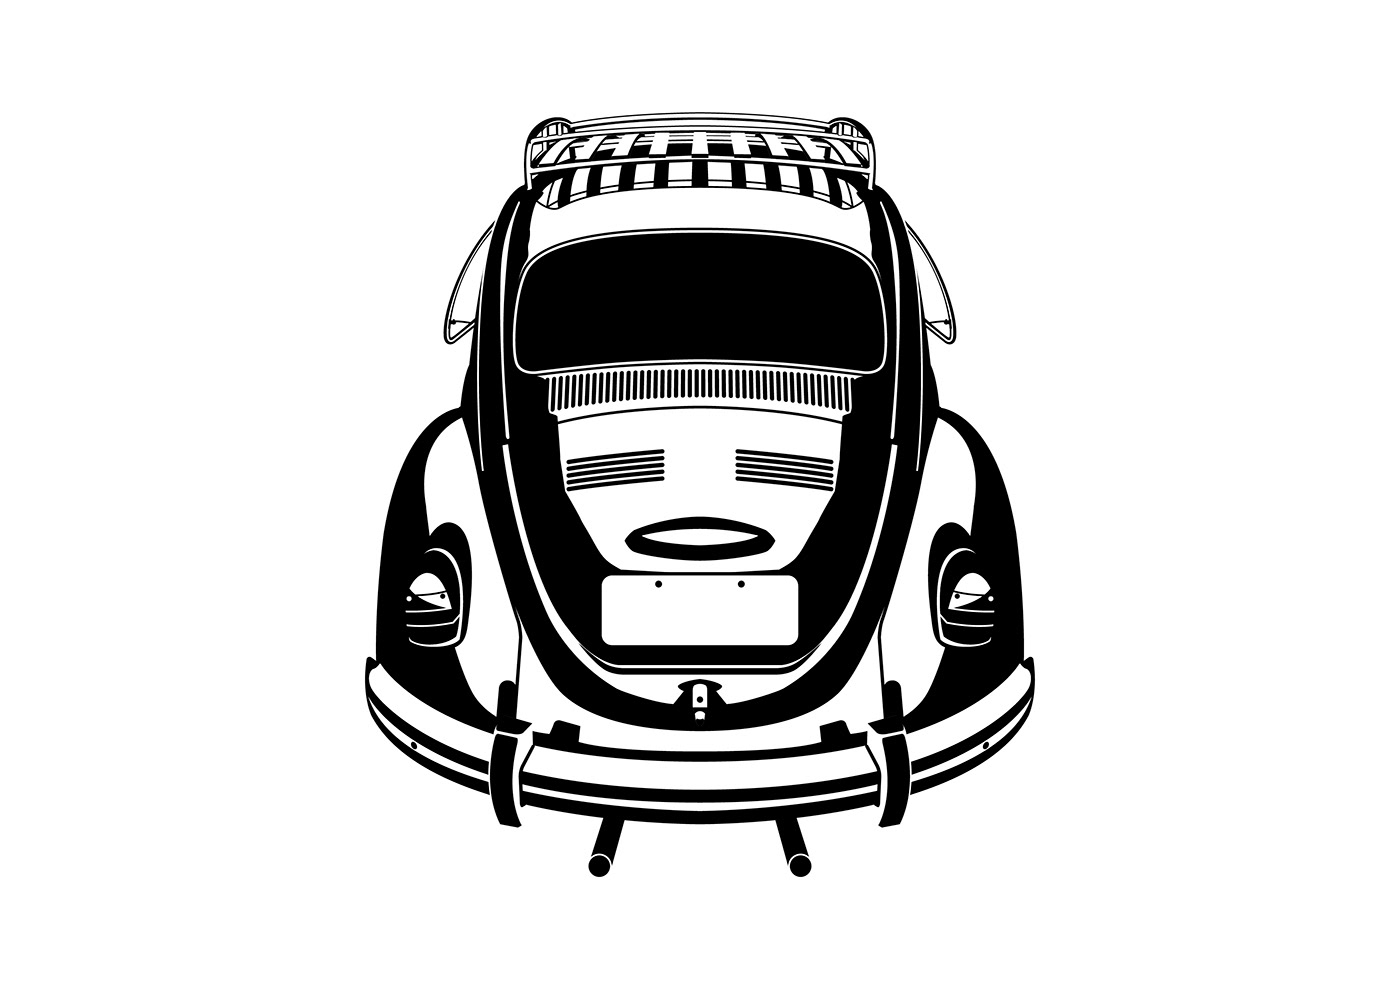 Classic beetle volkswagen car vector black and white